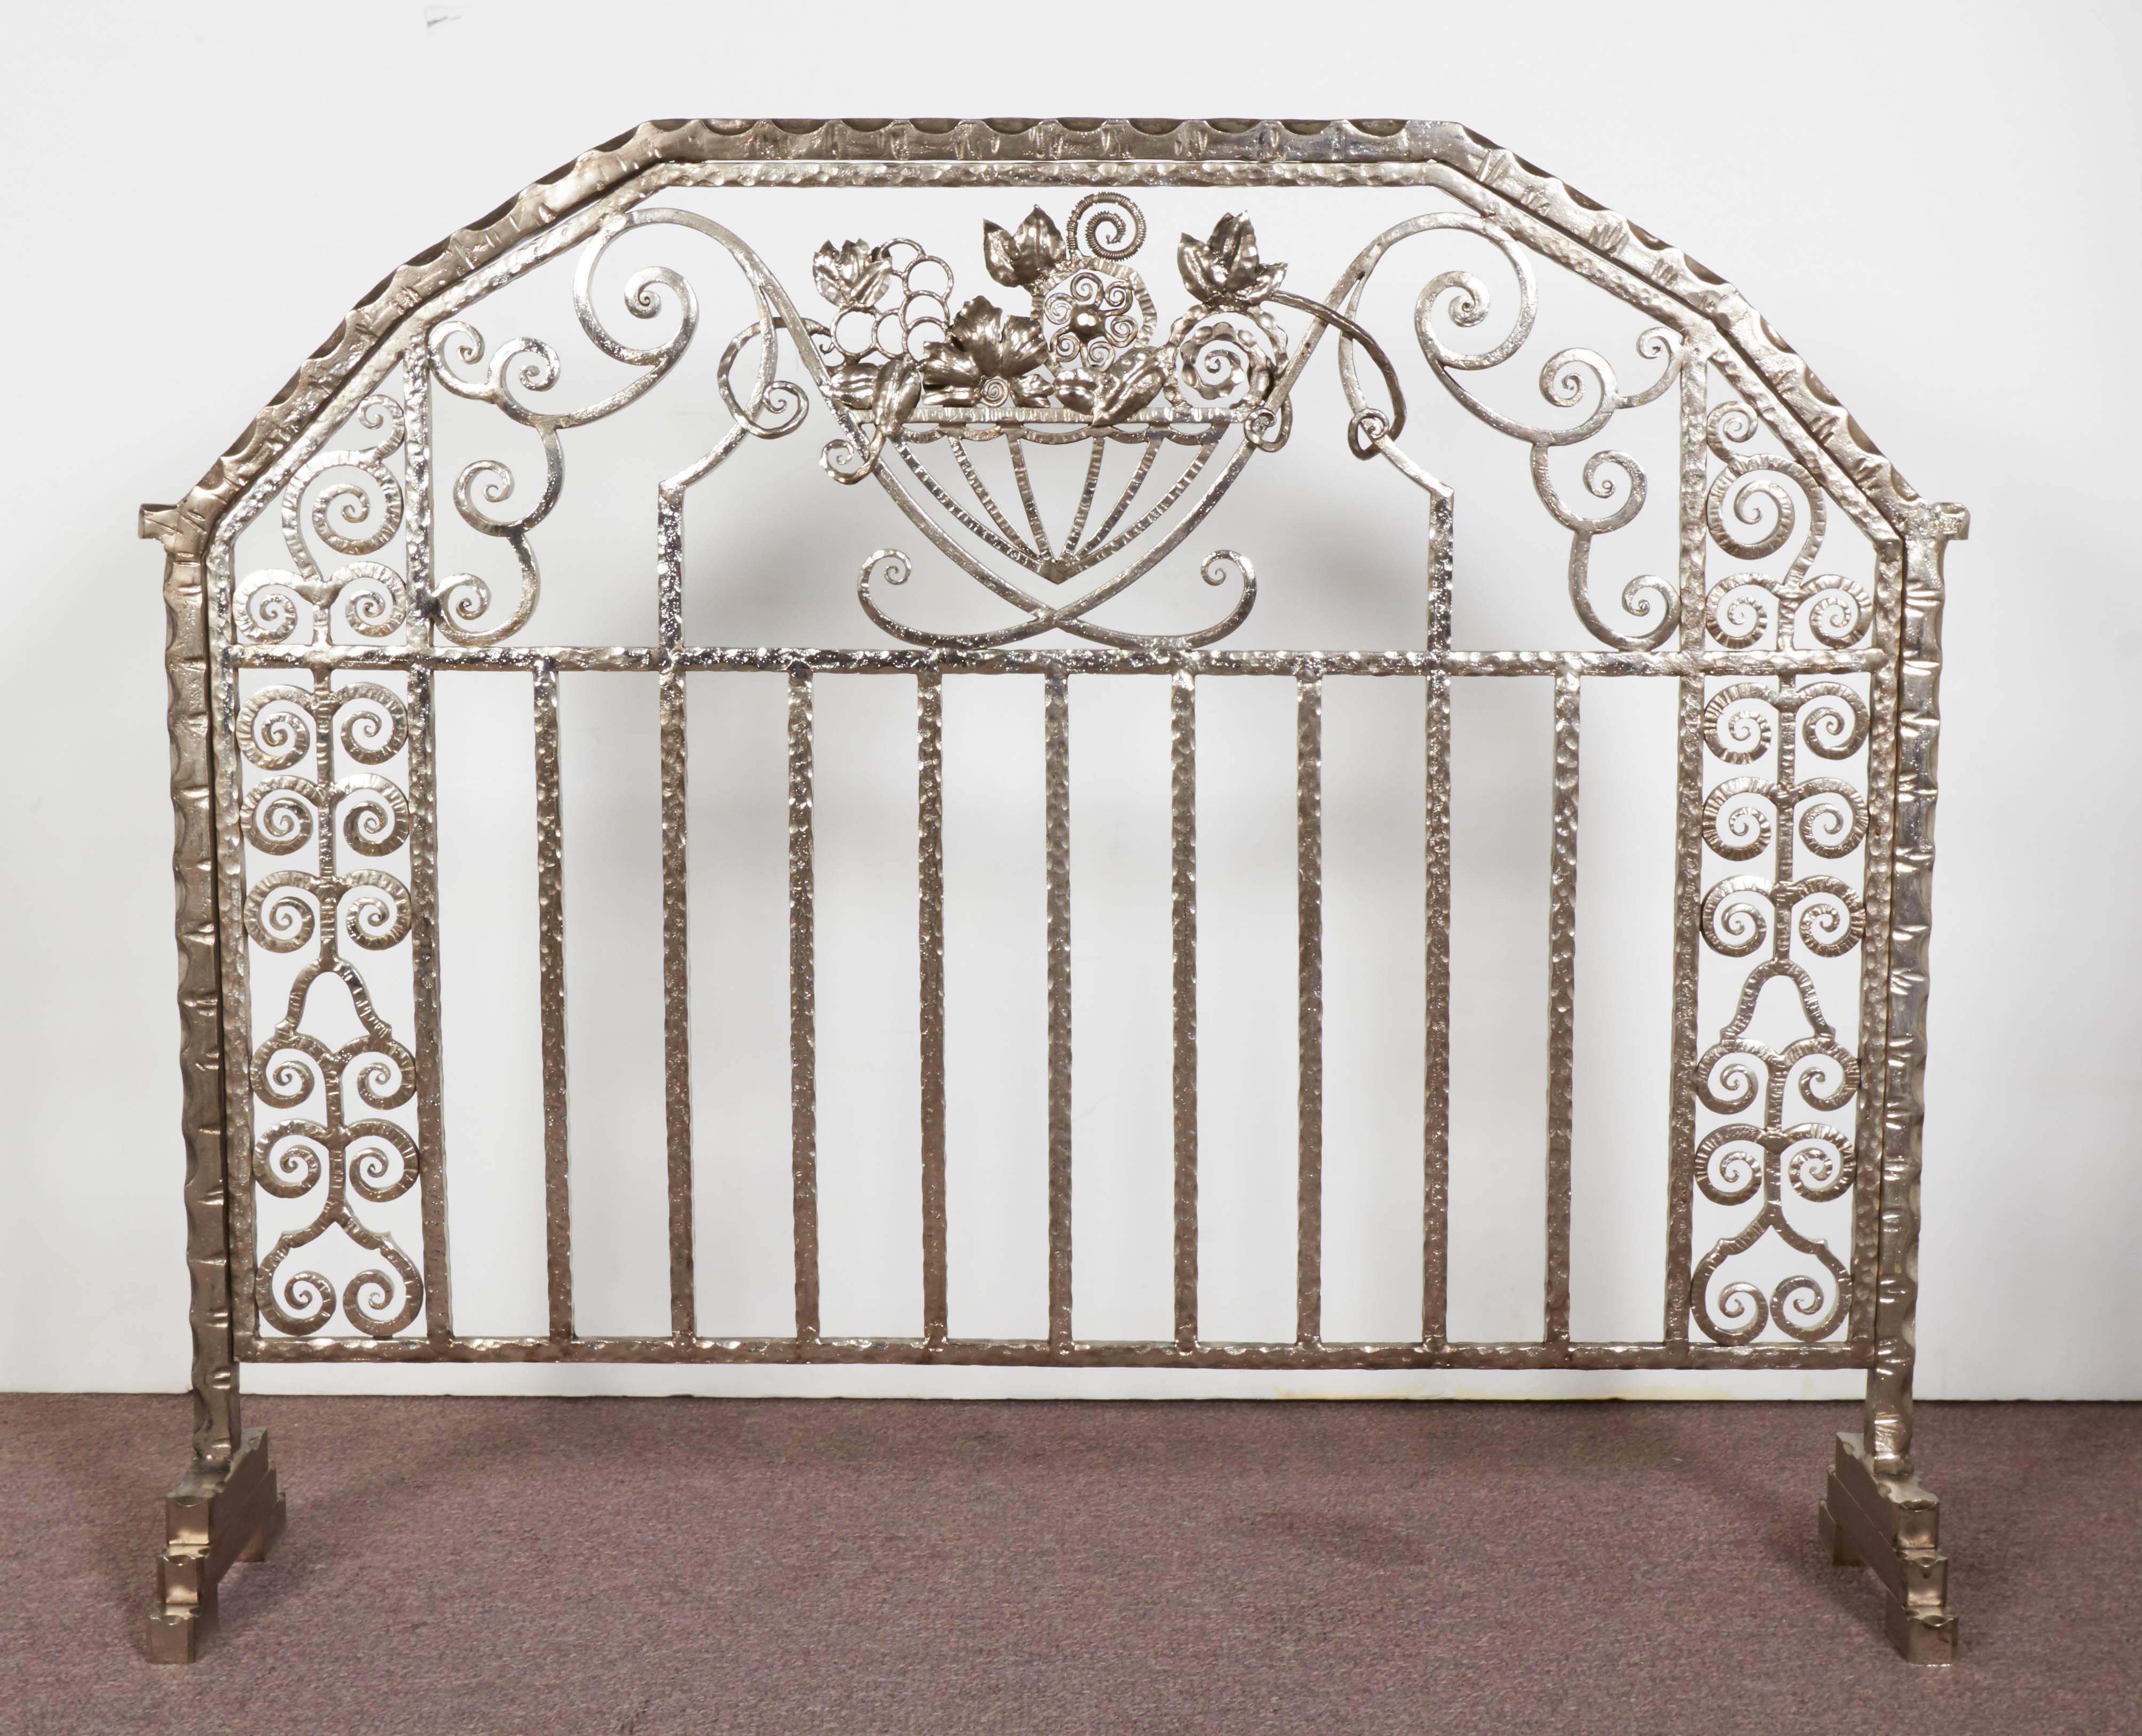 An exceptional pair of hand-forged iron Art Deco fire screens featuring overall linear and scroll detail with three dimensional central floral motif of superb martele hammering, unusually finished on both sides of the screen.
signed: J. Vanloo 
